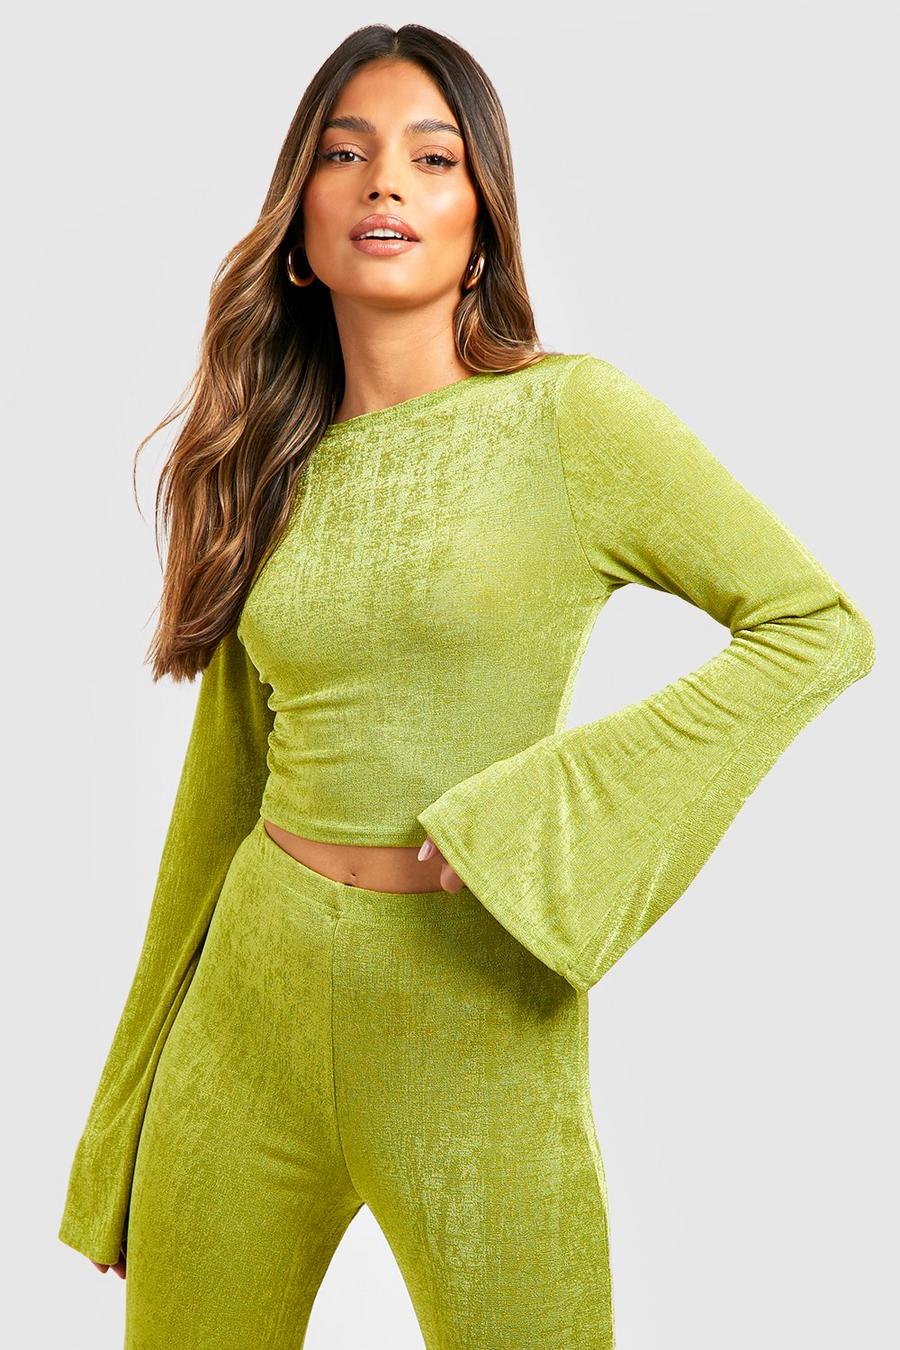 Chartreuse Acetate Slinky Flared Sleeve Top